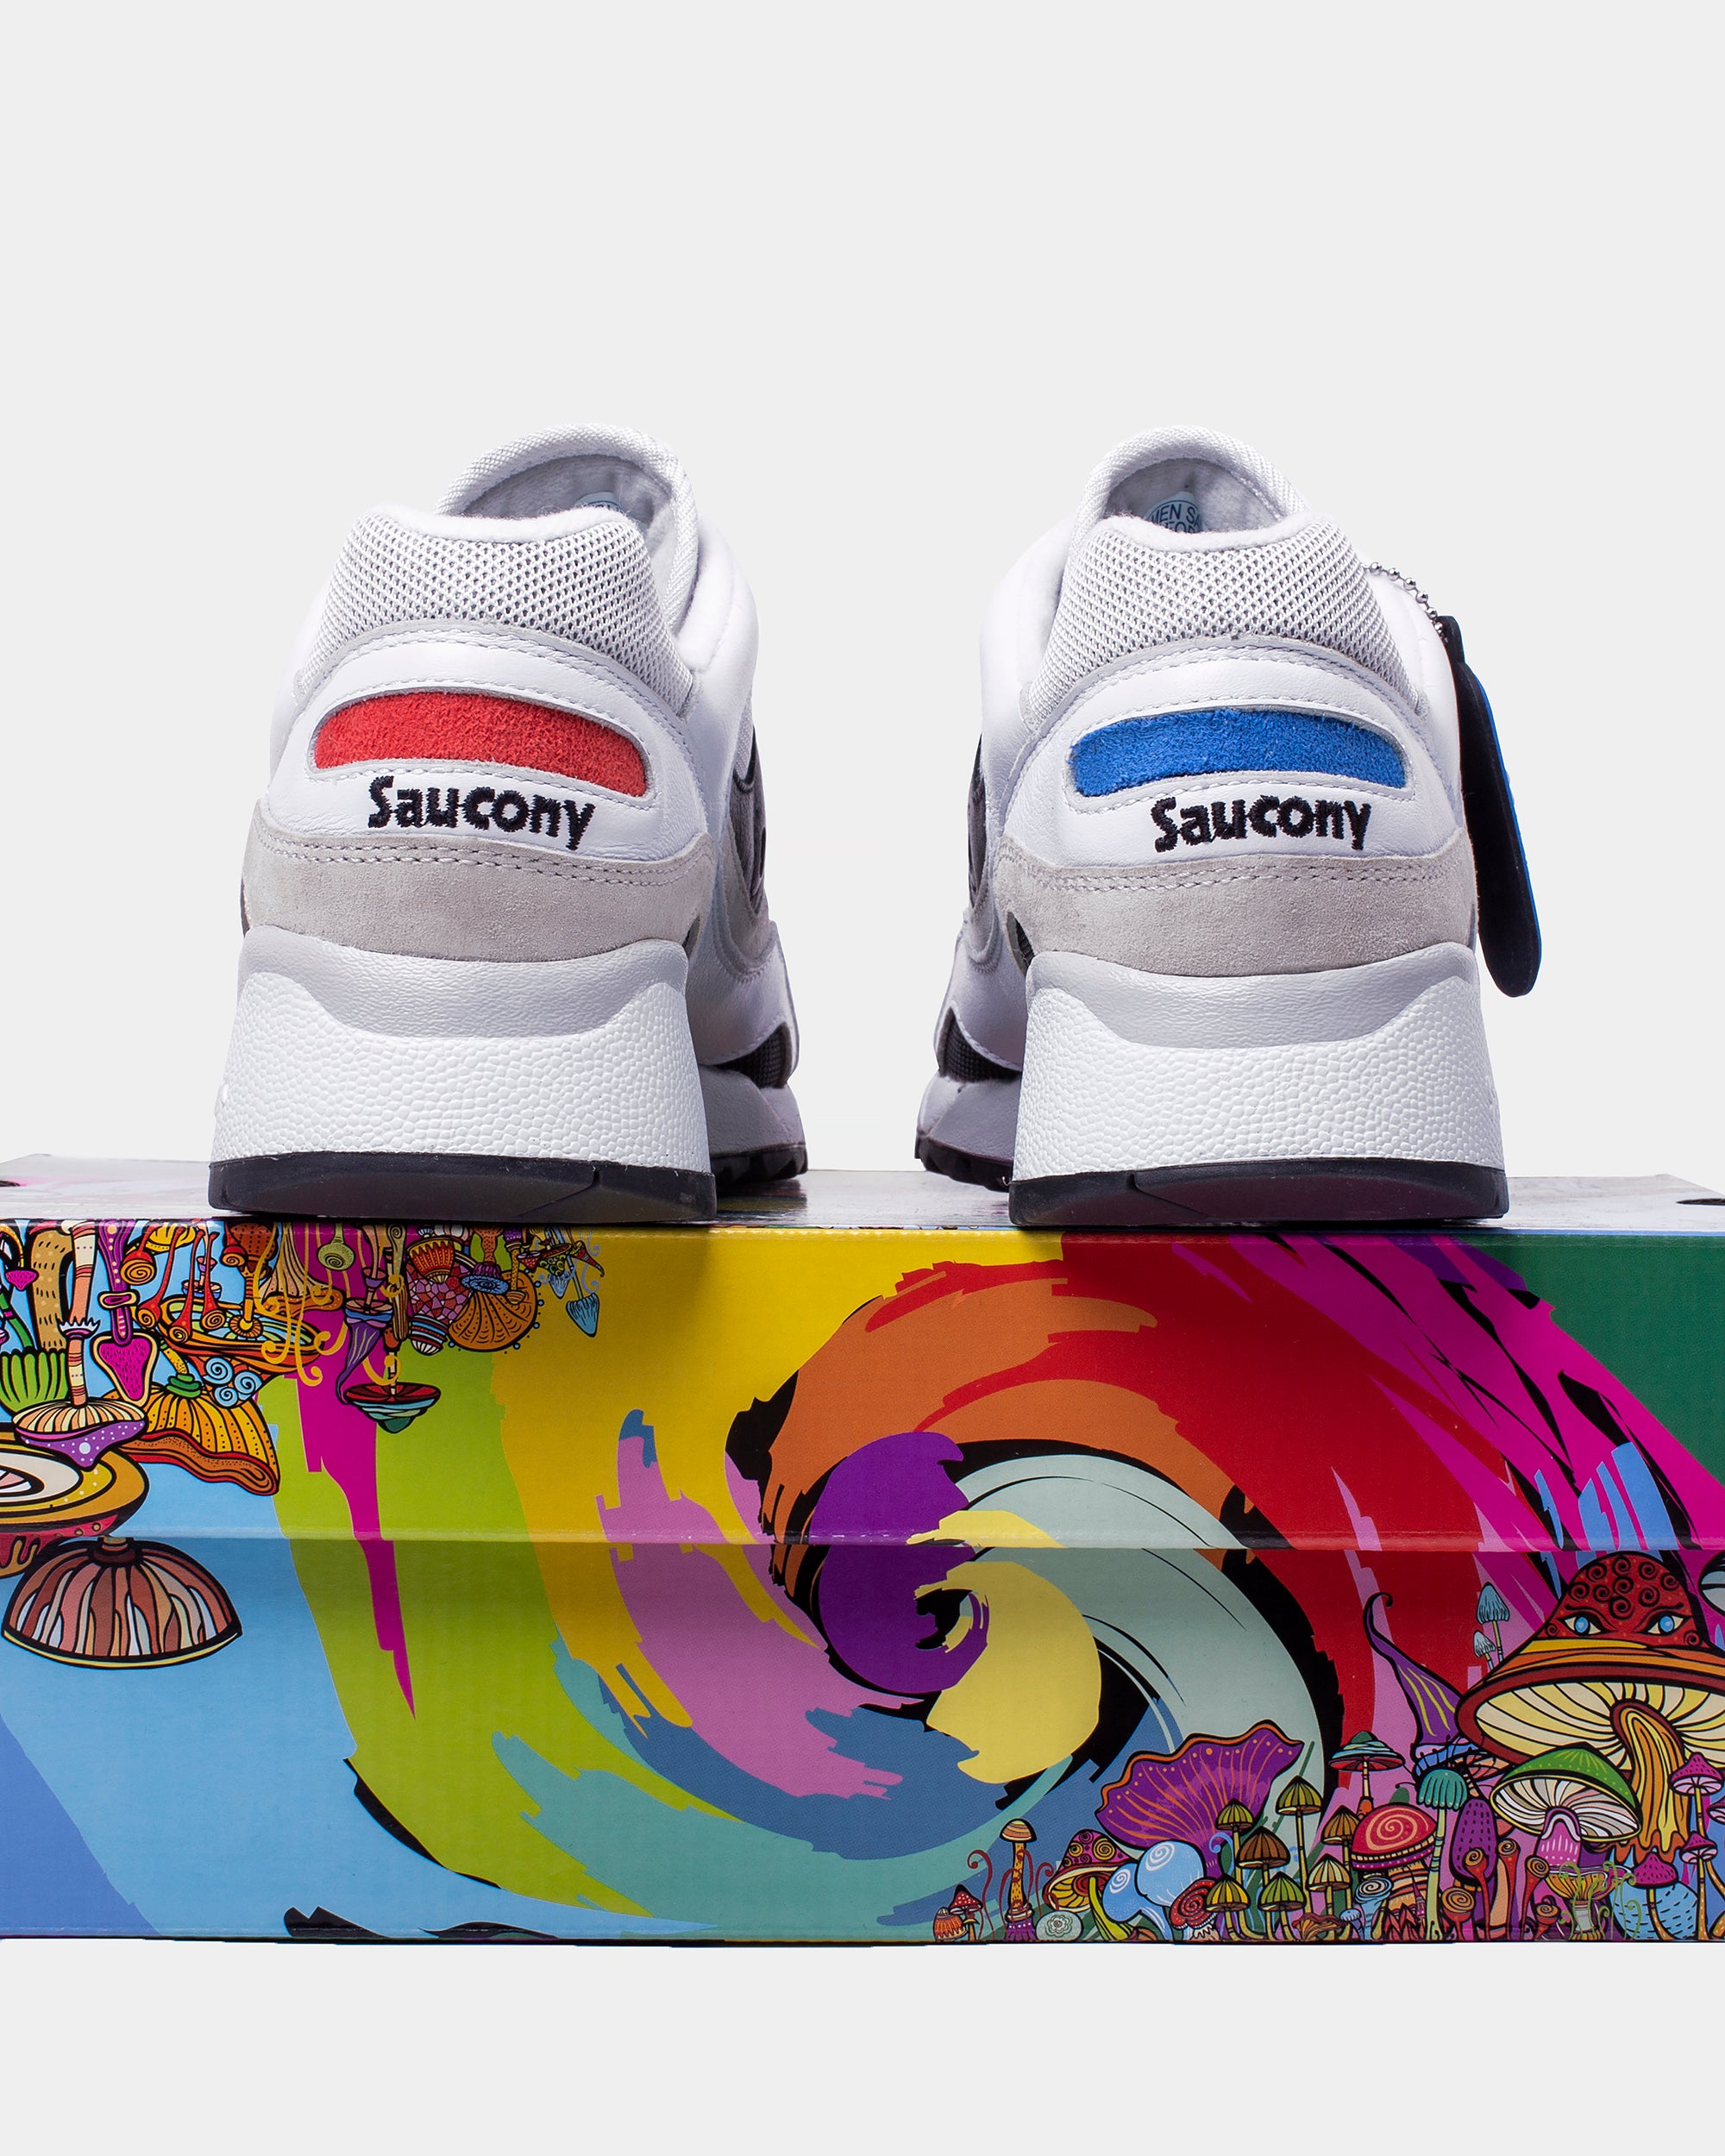 Extra Butter x Saucony Originals 'White Rabbit' Shadow 6000 card image